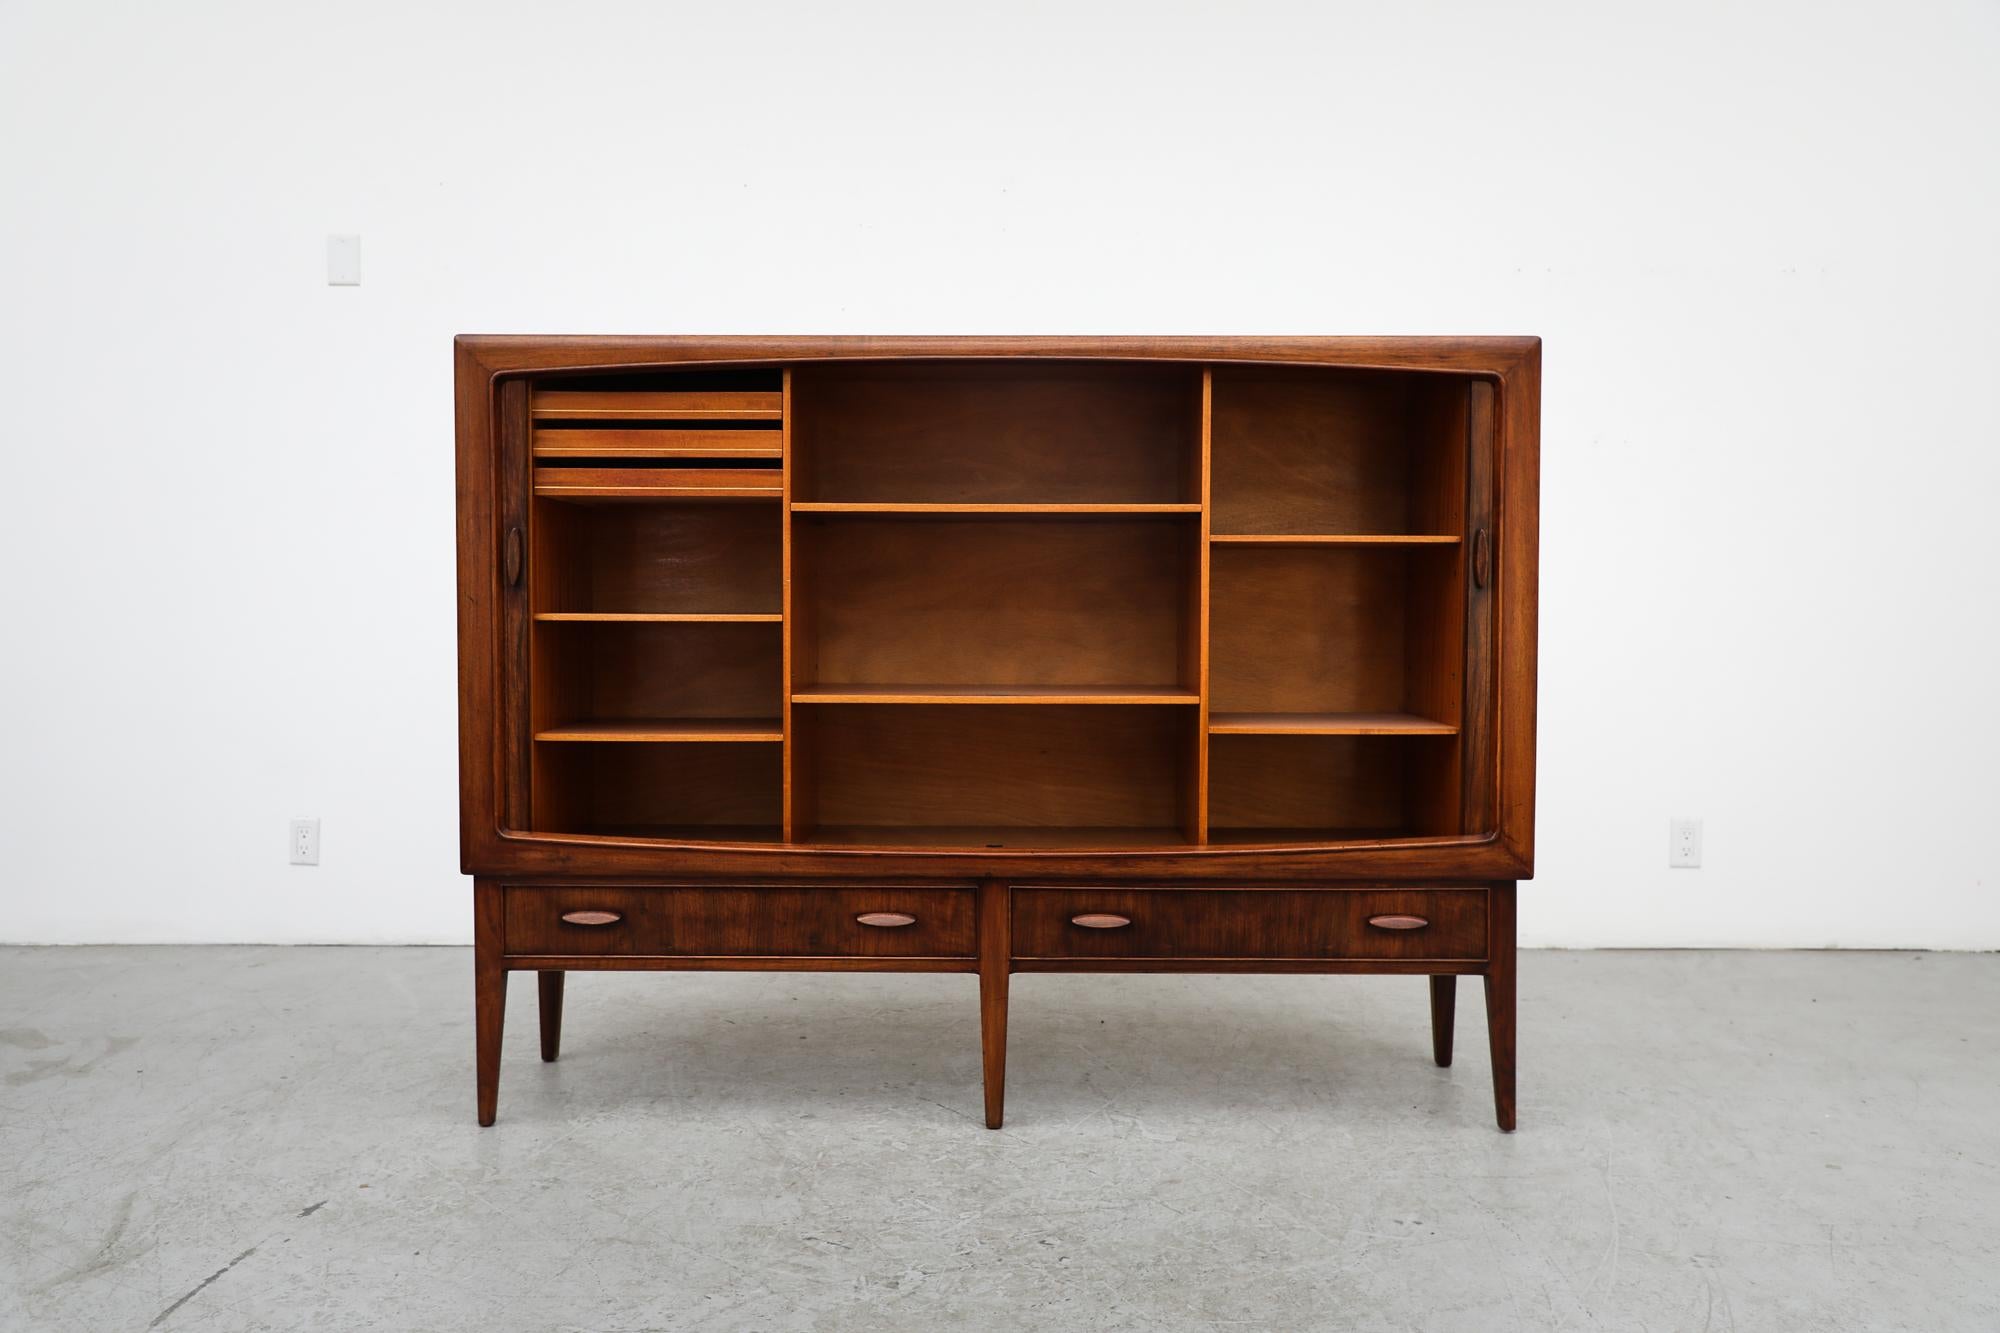 Walnut Cabinet by Kurt Østervig for Brande Mobelfabrik, 1960's. This piece has tambour doors that open to reveal shelving and inner drawers. In original condition with visible wear consistent with its age and use.